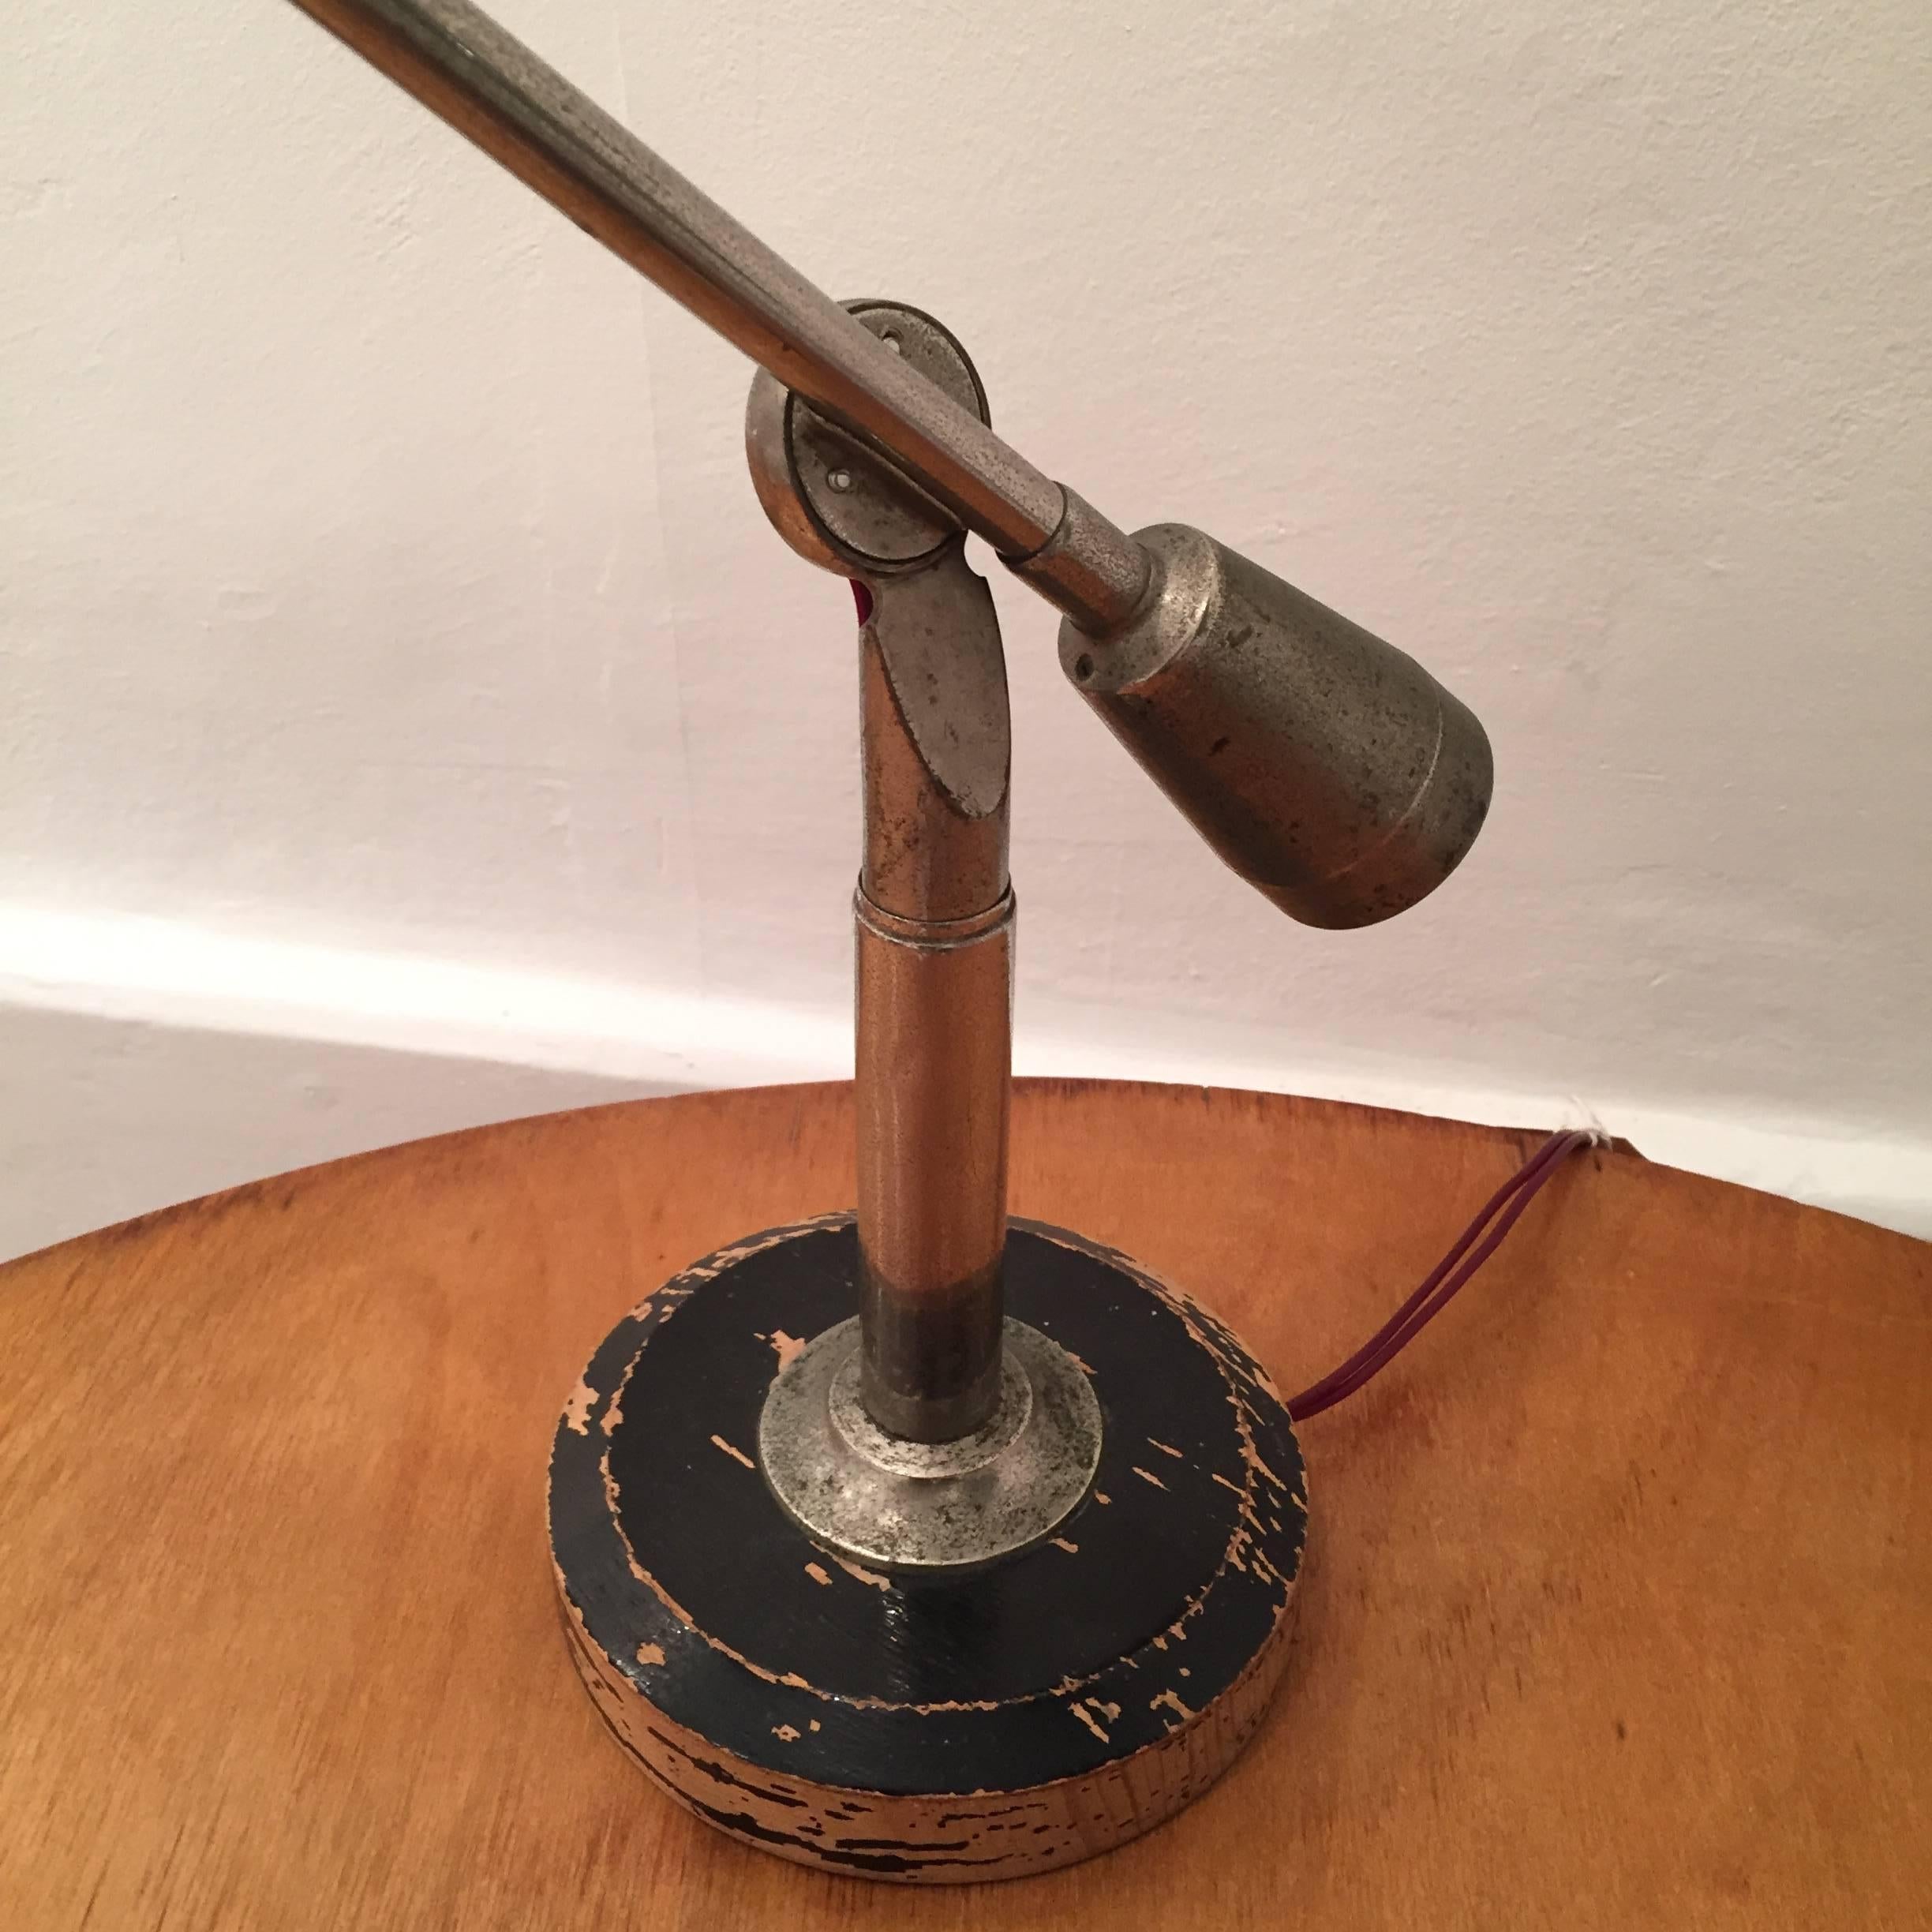 This vintage table lamp was designed by Edouard Wilfred Buquet and produced by SGDG Paris in 1927. It is made from aluminum and fixed to a wooden base that features the makers label.